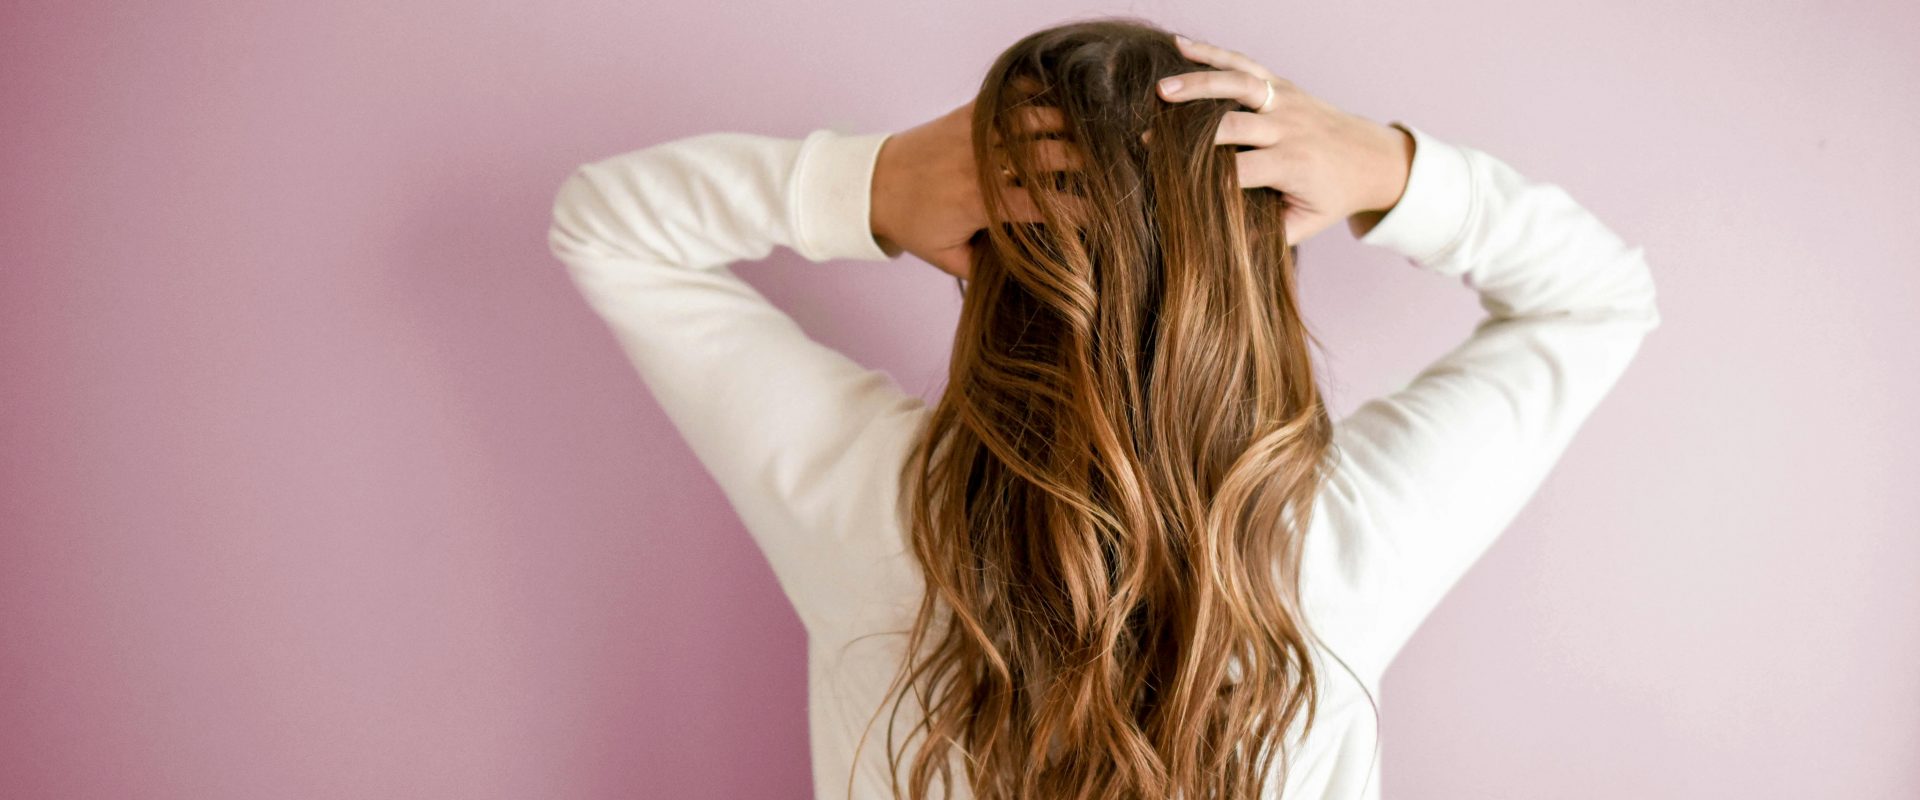 10 Interesting facts you didn't know about your hair